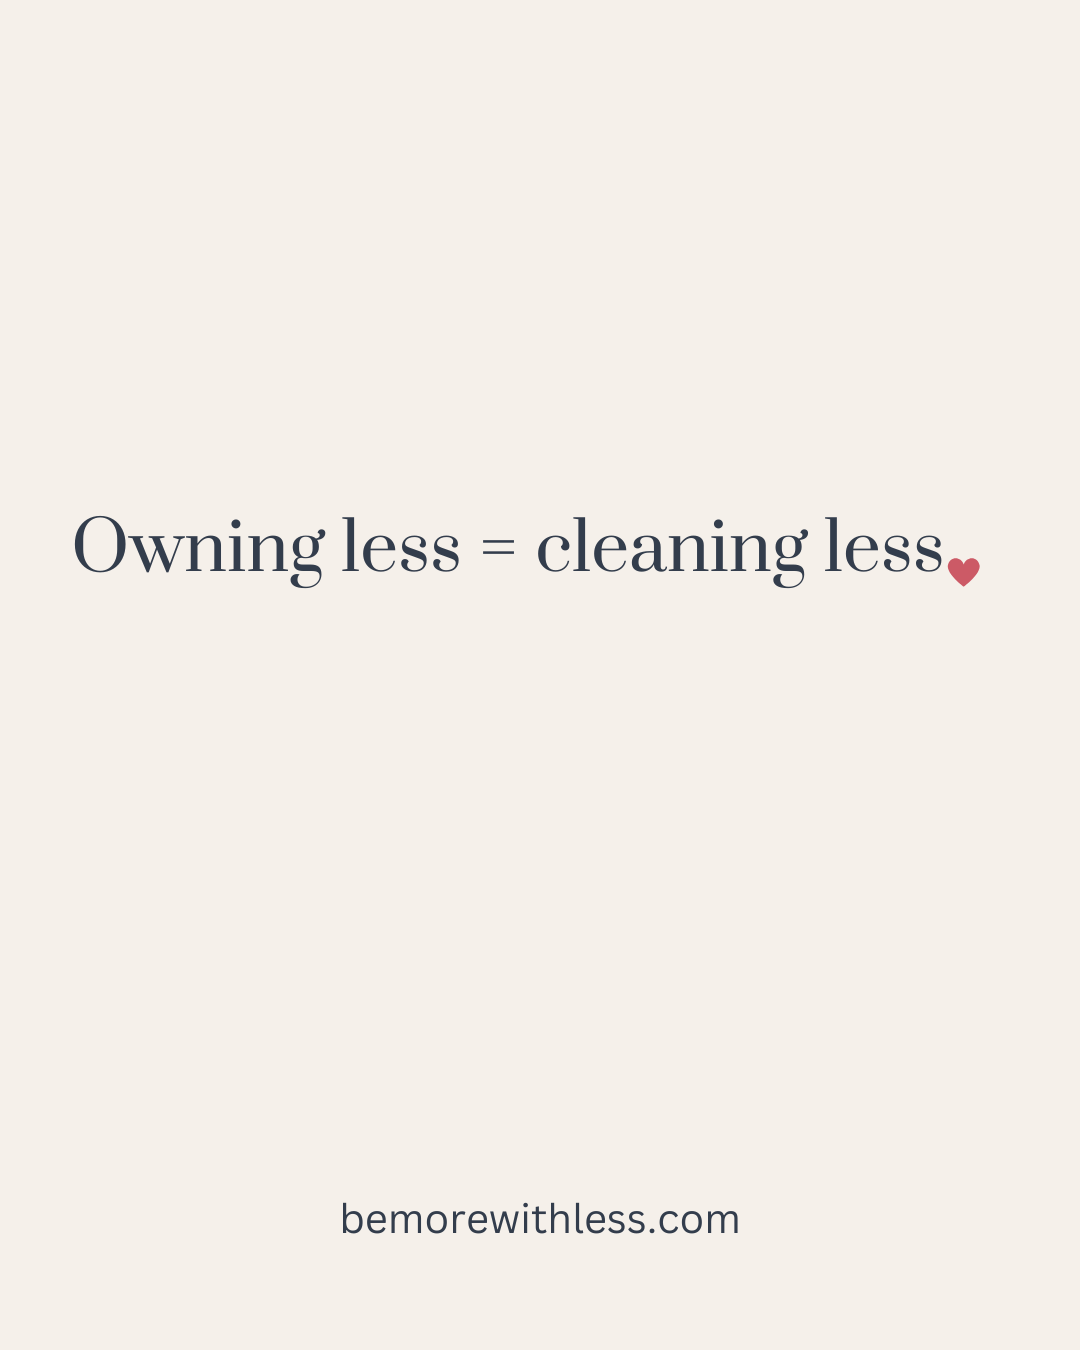 Owning Less Means Cleaning Less